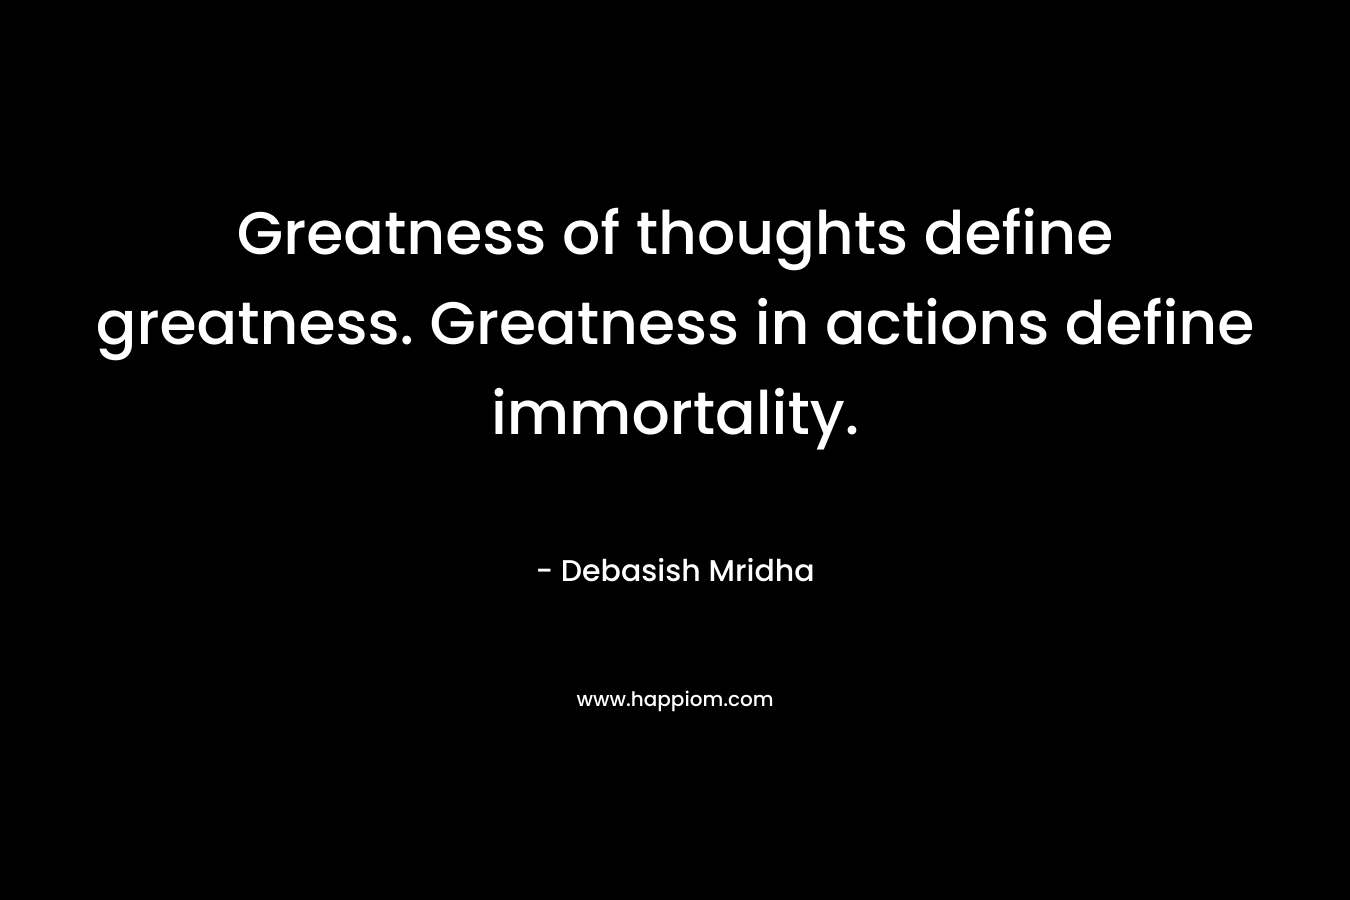 Greatness of thoughts define greatness. Greatness in actions define immortality.